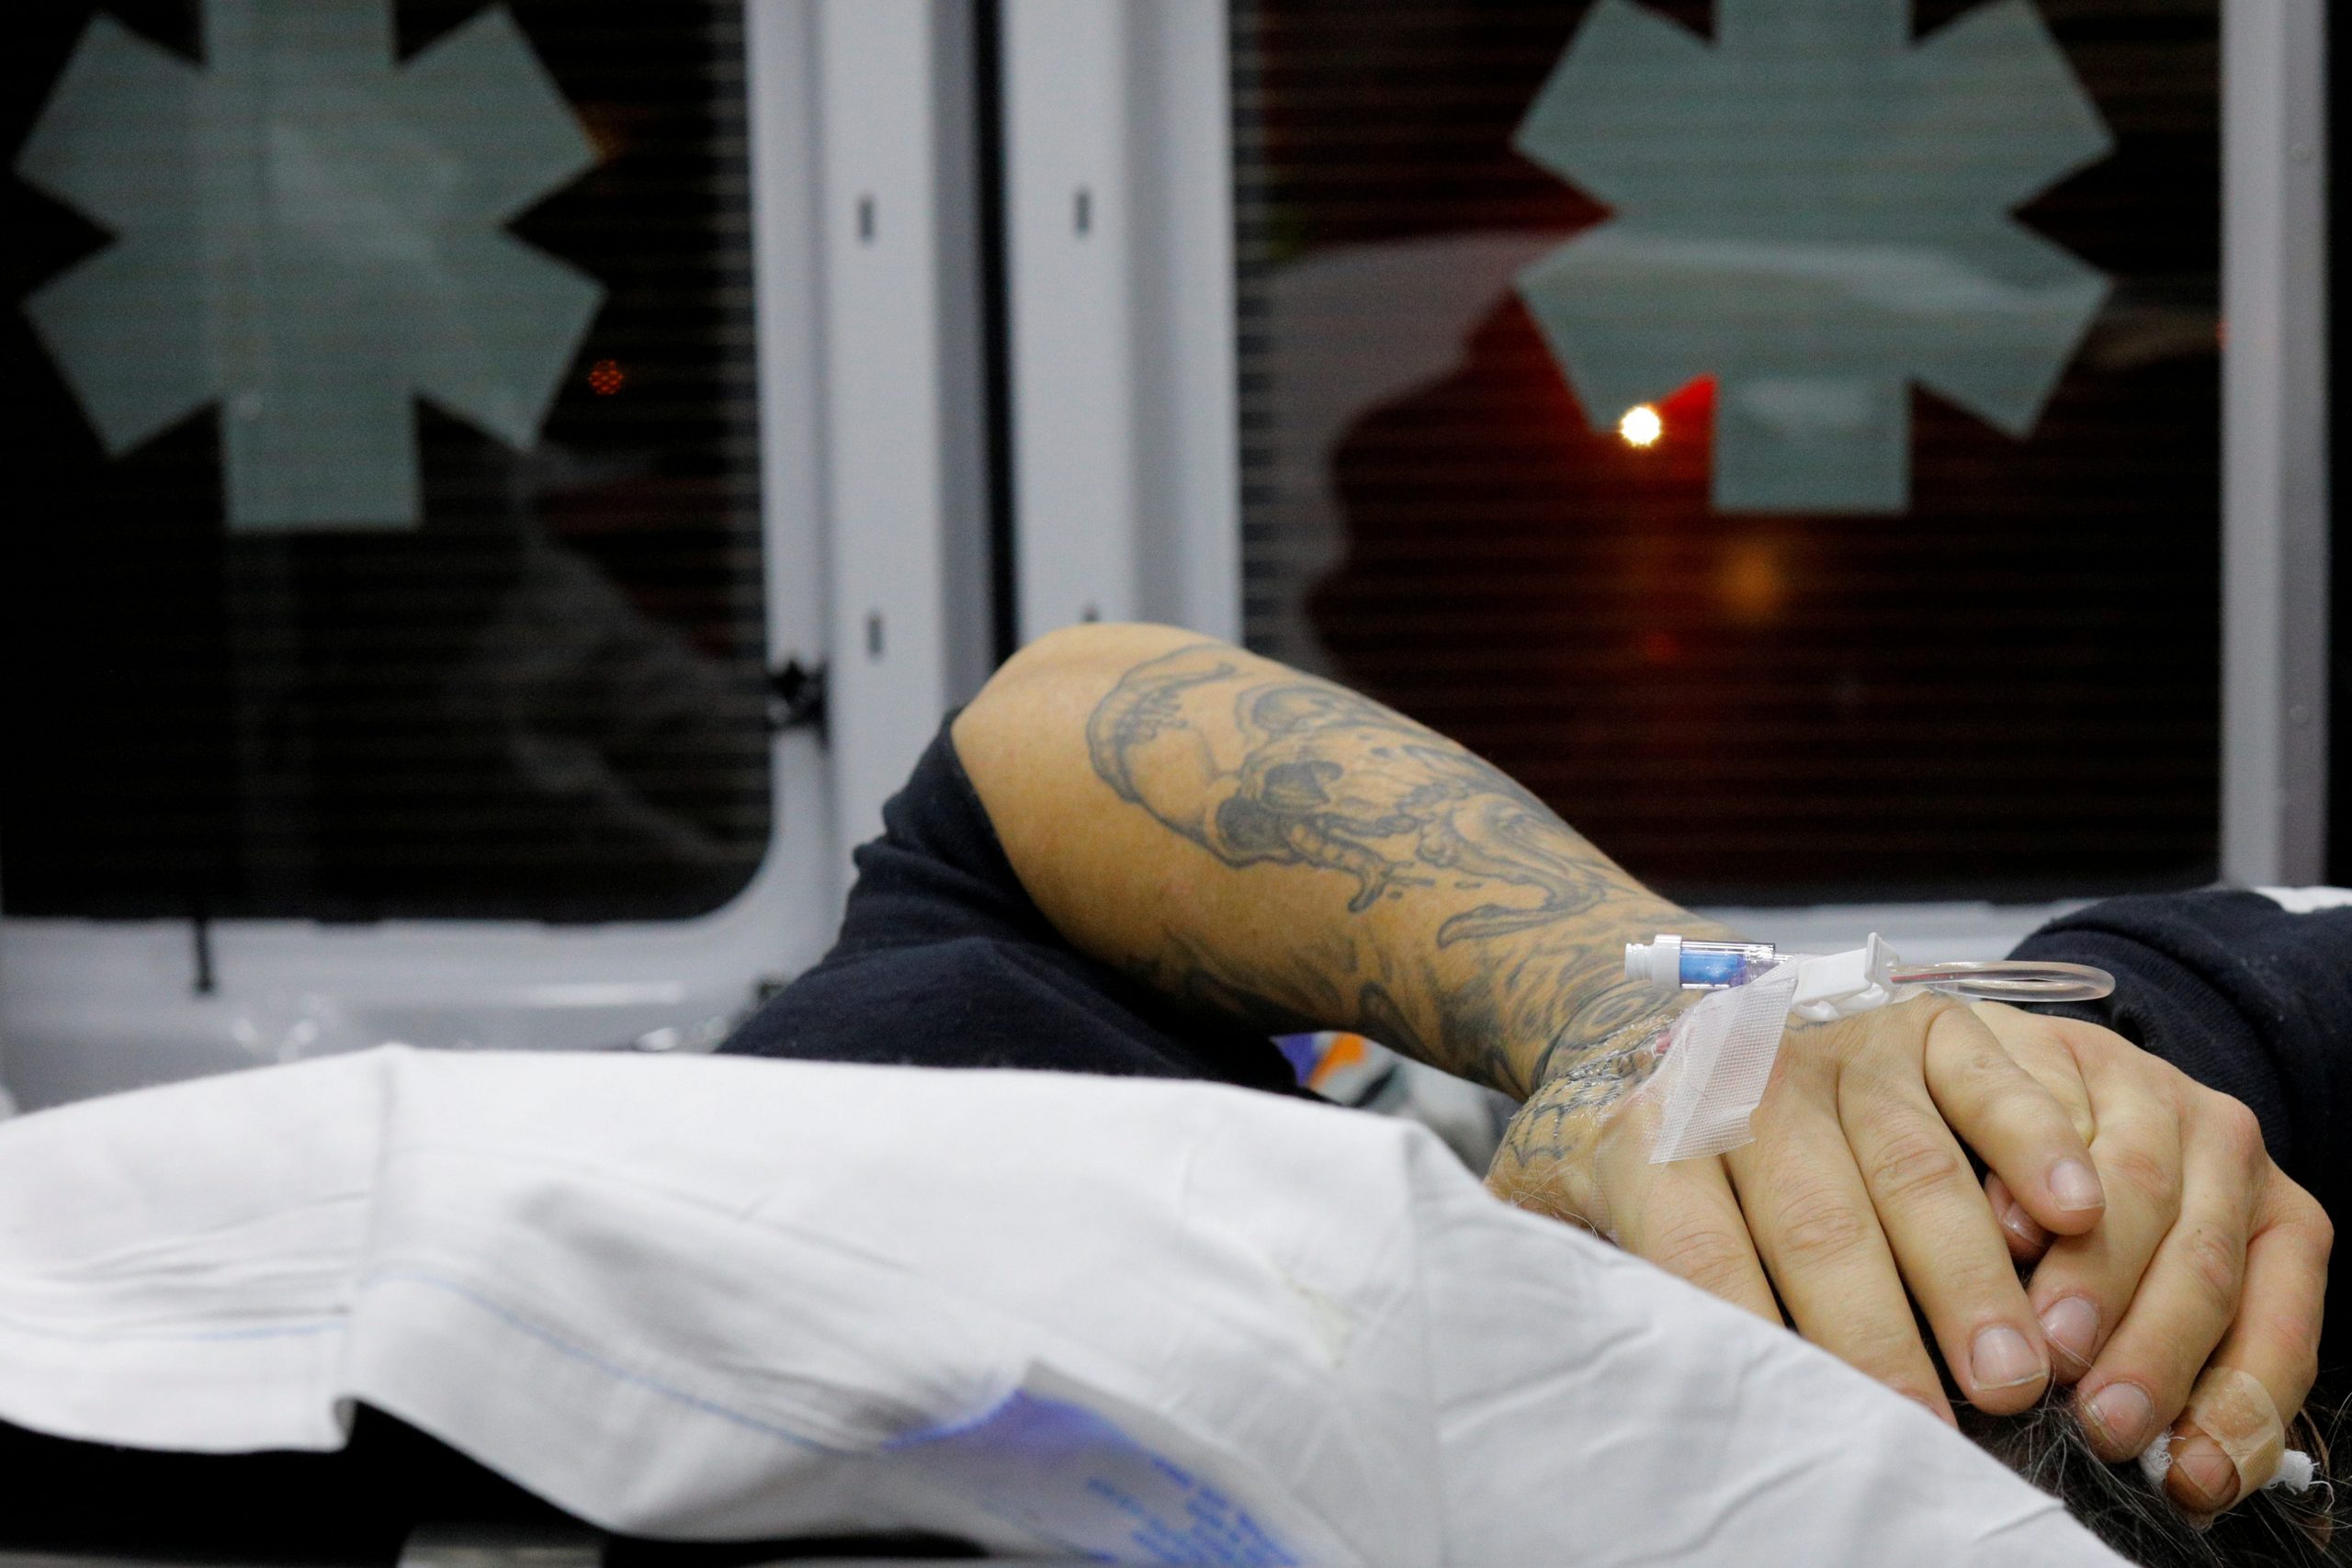 FILE PHOTO: A 41-year-old man found unconscious after overdosing on opioids in the driver's seat of a car, with the engine running and the transmission in drive, puts his hands over his head in the back of a Cataldo Ambulance at a gas station in the Boston suburb of Malden, Massachusetts, December 2, 2017. REUTERS/Brian Snyder/File Photo